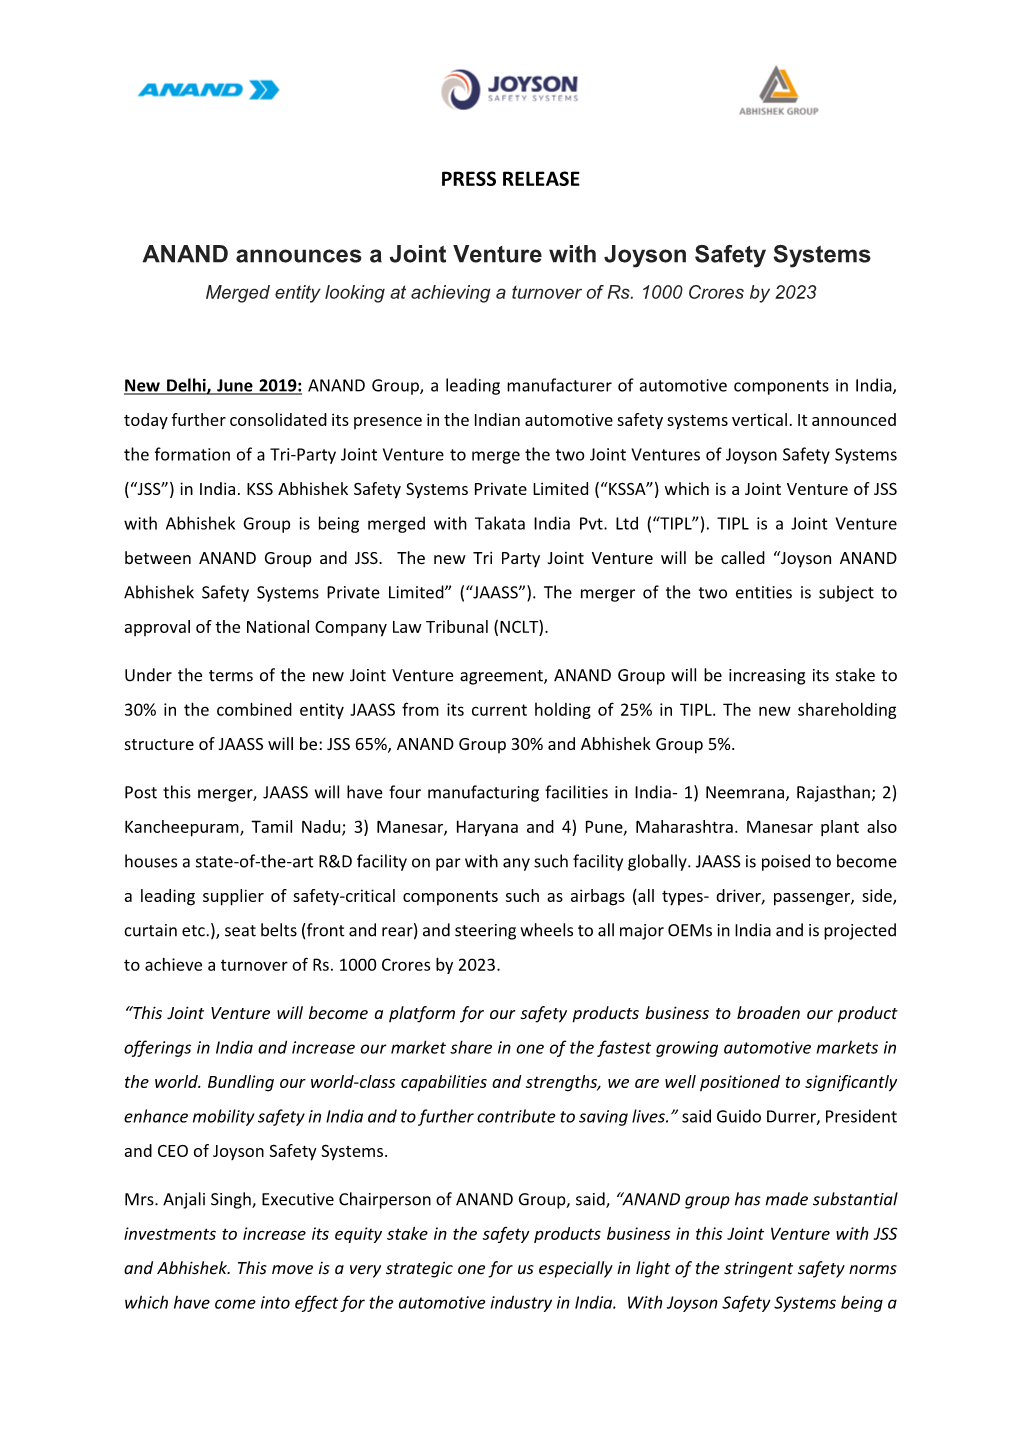 ANAND Announces a Joint Venture with Joyson Safety Systems Merged Entity Looking at Achieving a Turnover of Rs